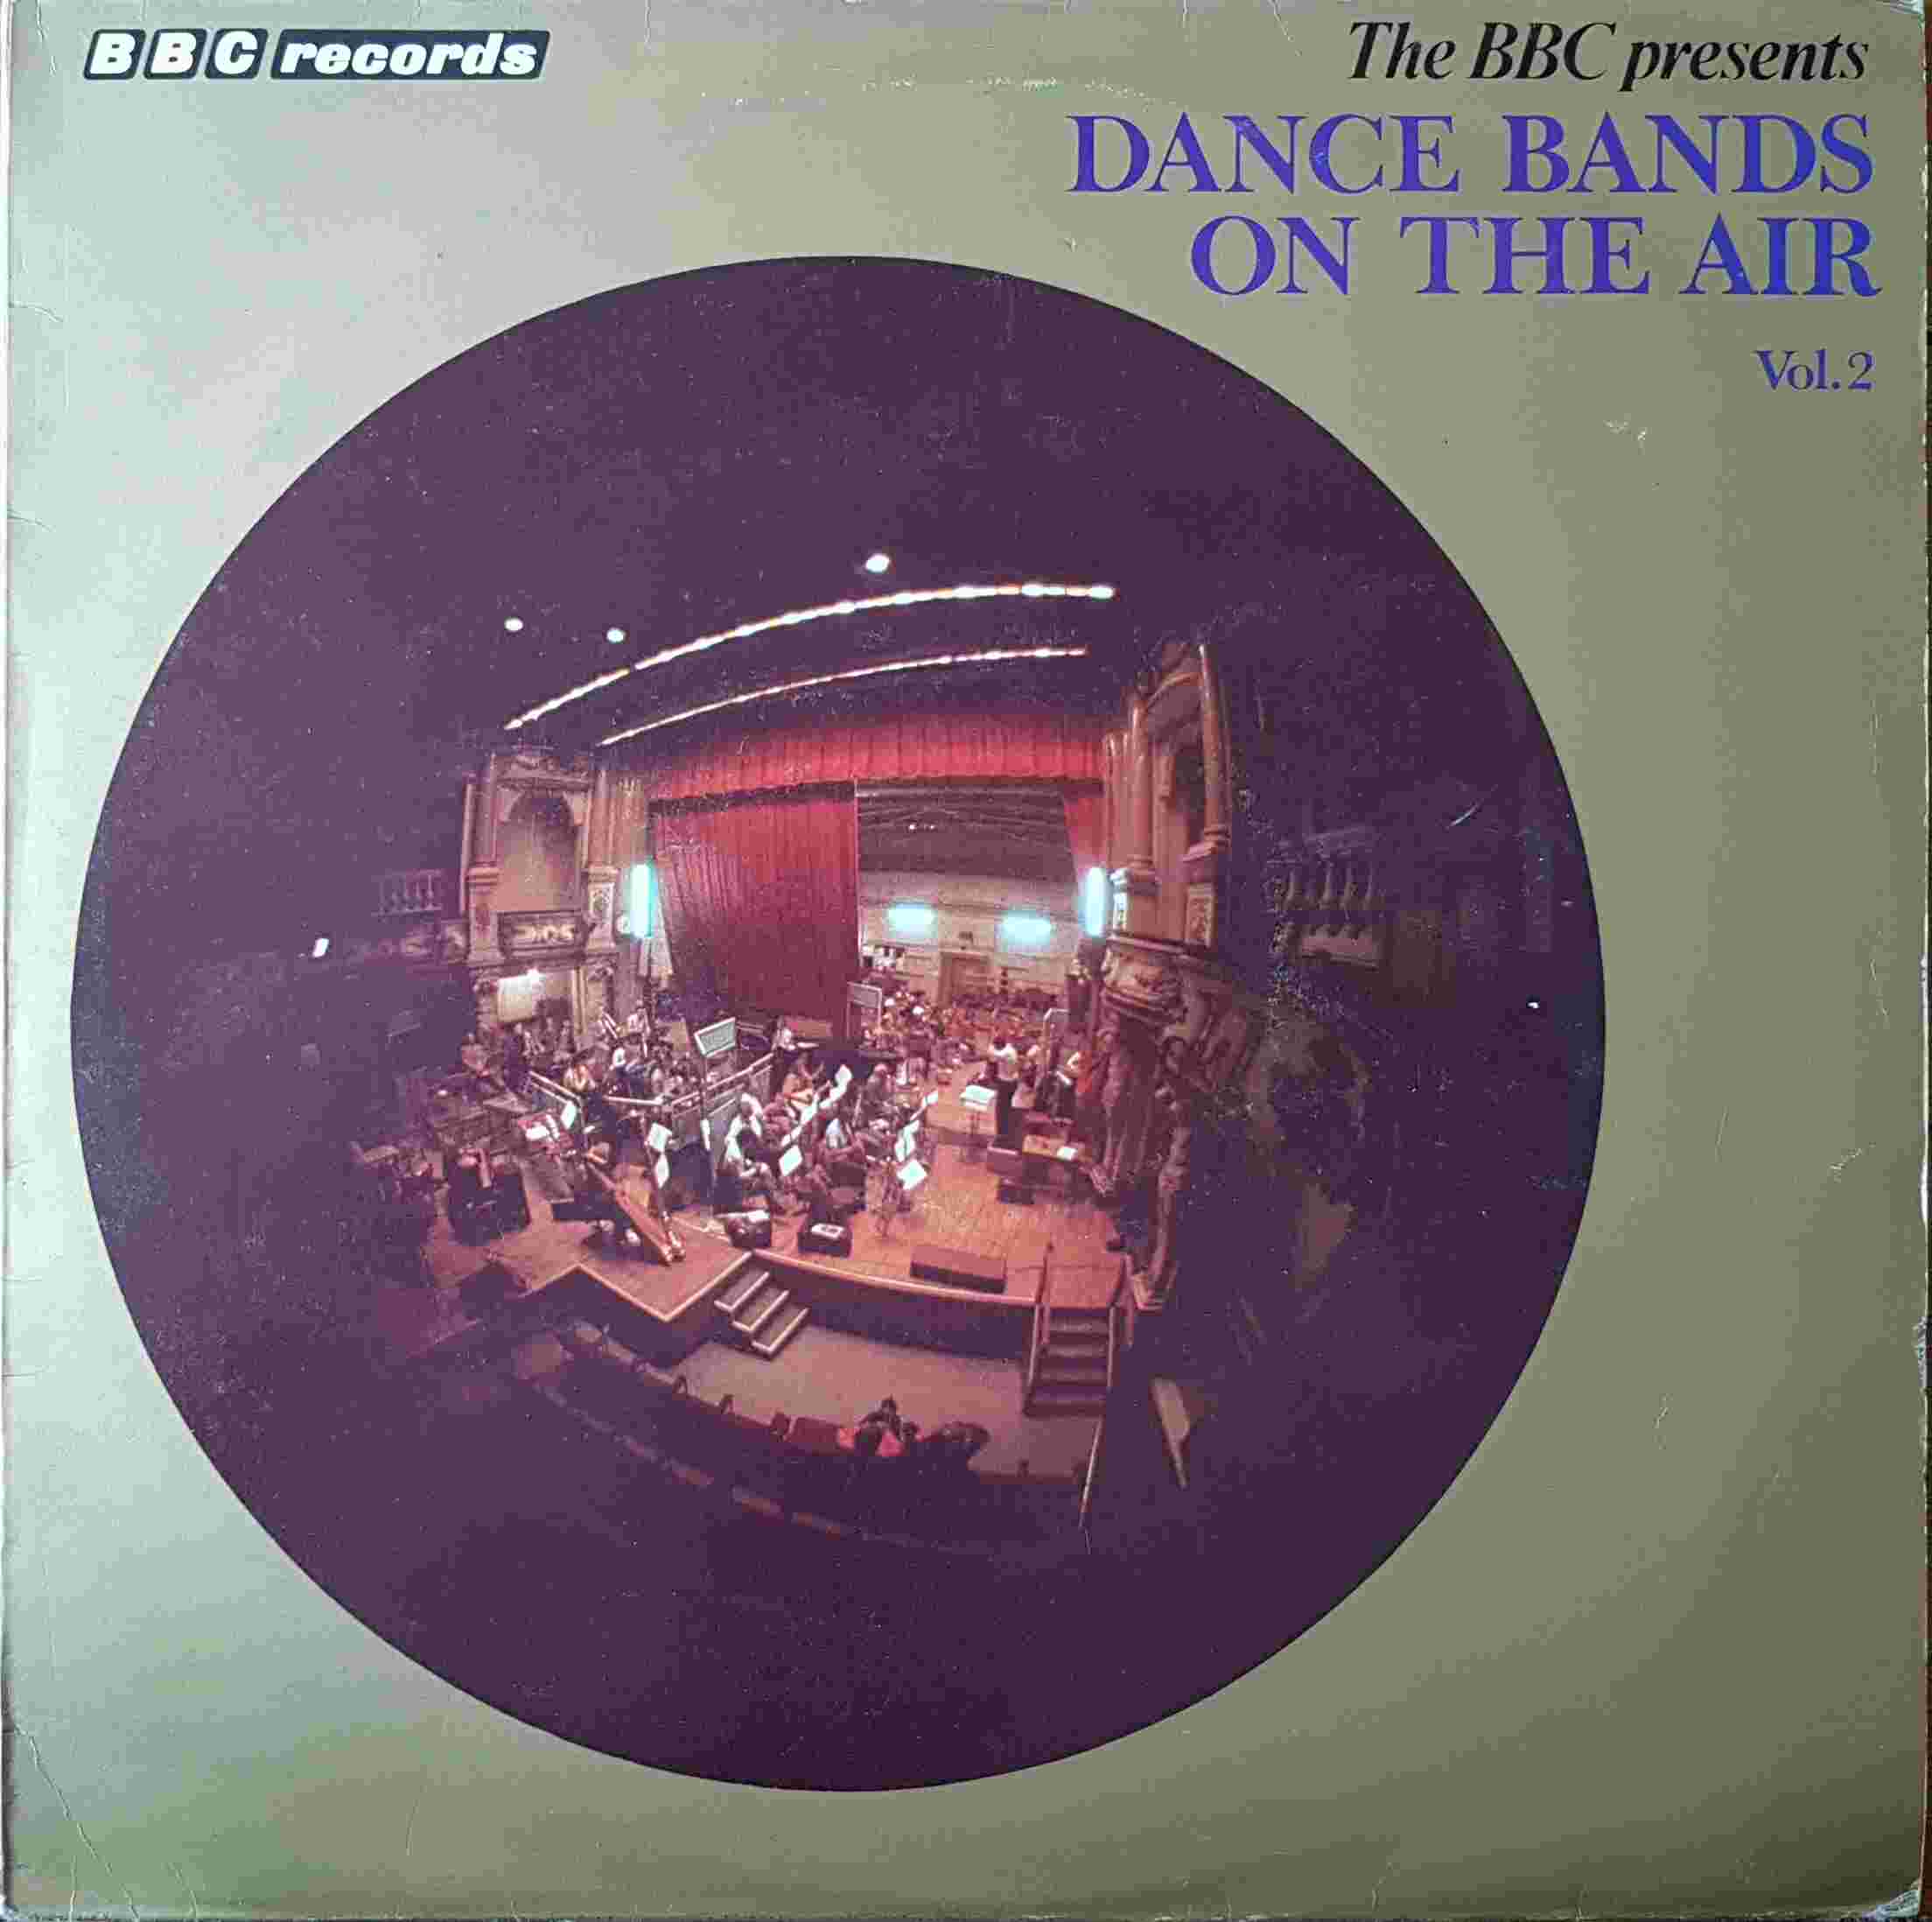 Picture of REC 140 Dance bands on the air - Volume 2 by artist Various from the BBC albums - Records and Tapes library